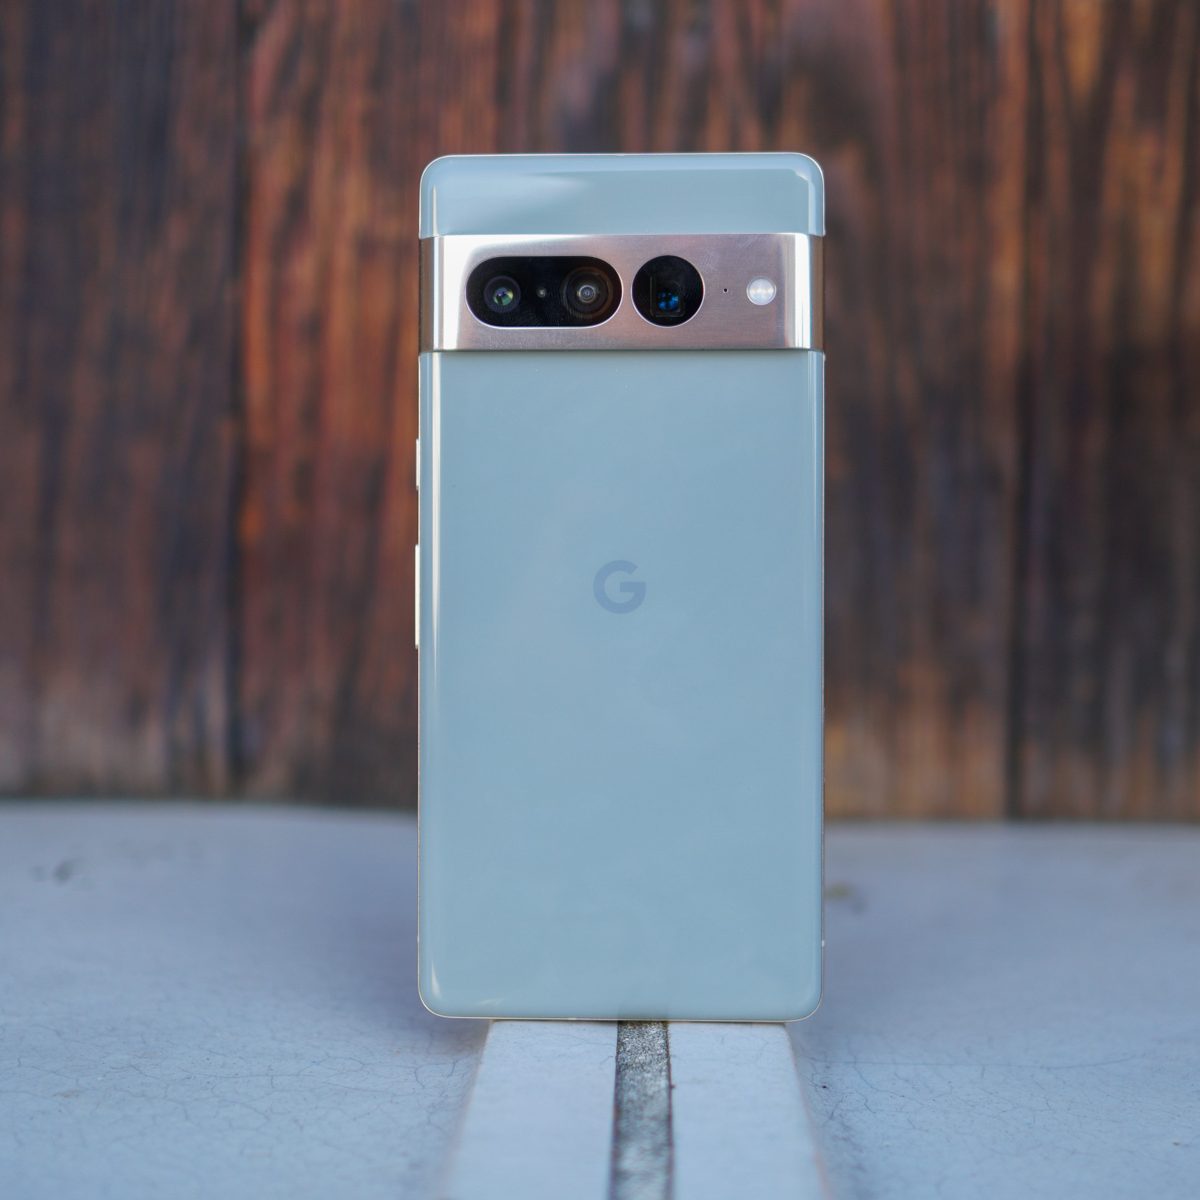 Pixel 7 Pro Review: Dare I Say It's the Perfect Google Phone?